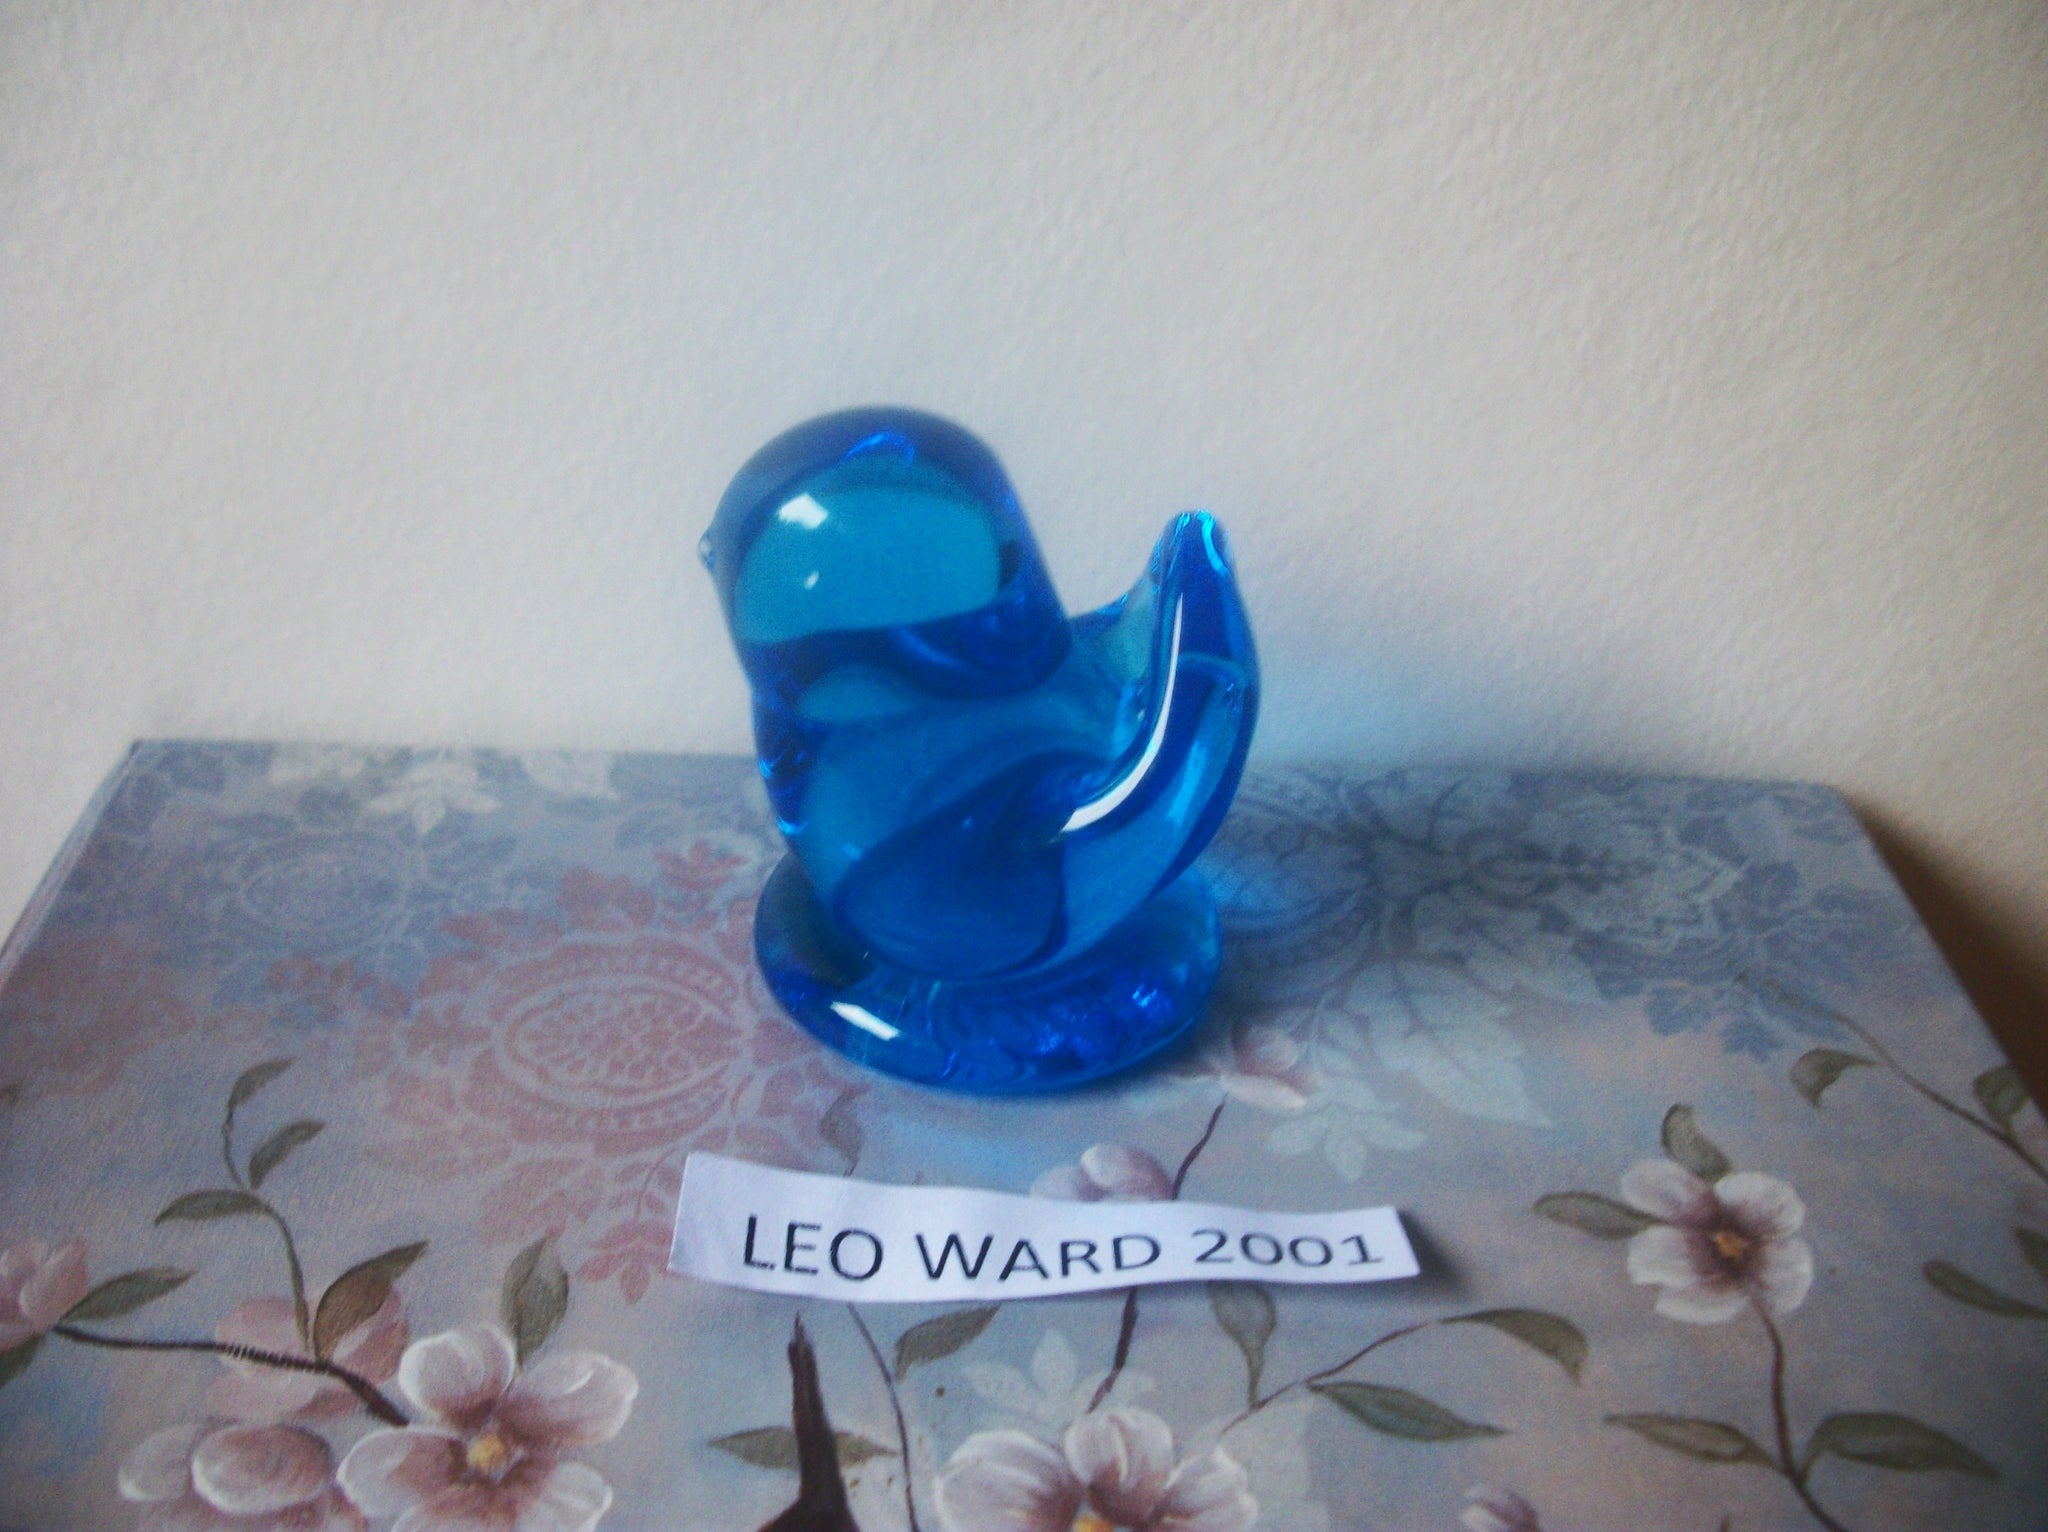 Vintage Small Blue Glass Marked Leo Ward 2001 Blue Bird Of Happiness, Bookcase Decor, Bedside Table, Collectible, Gift for Bird Lover C300